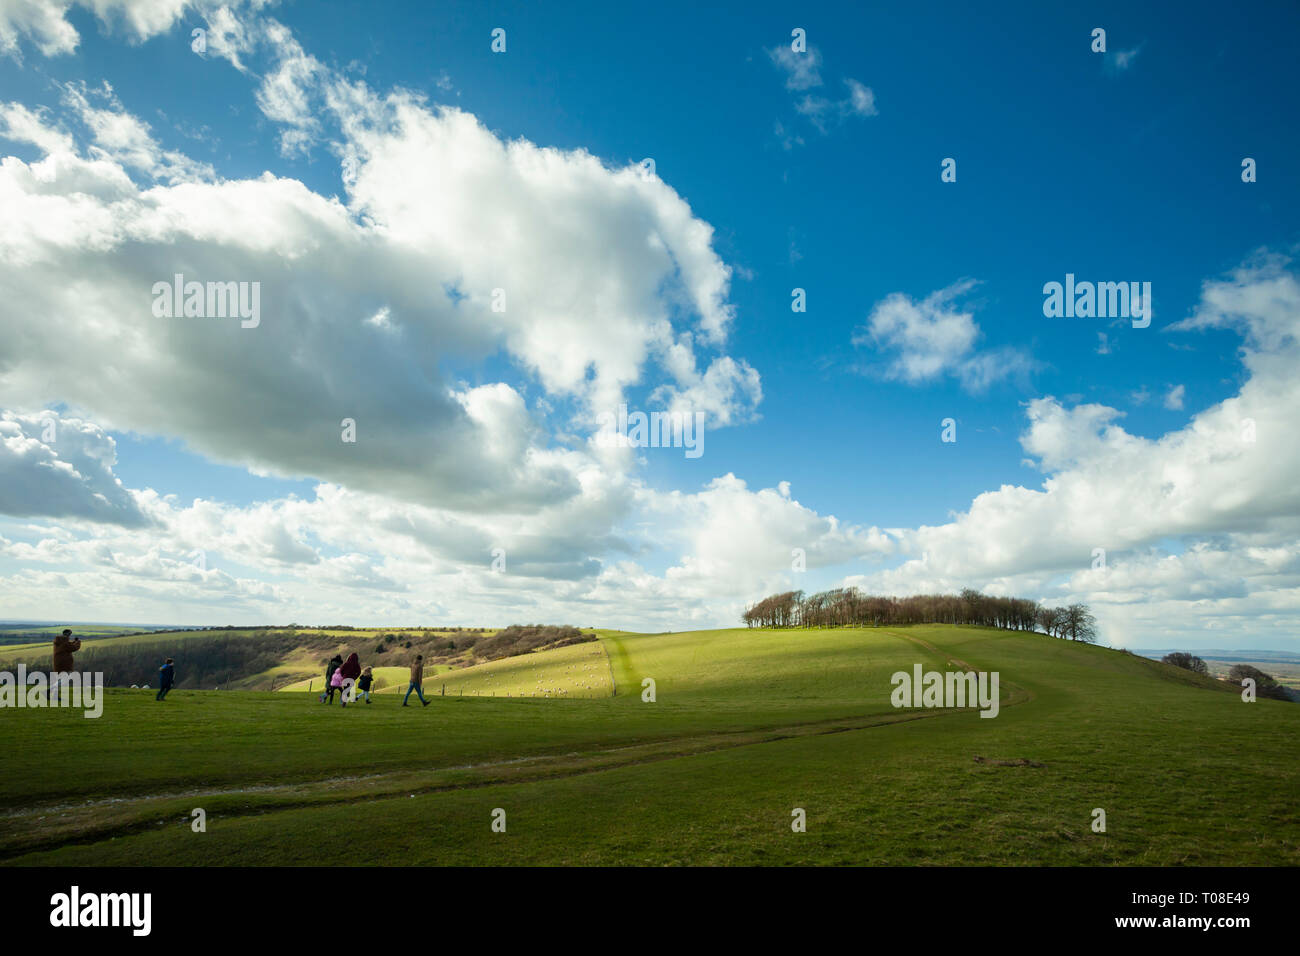 Early spring at Chanctonbury Ring in South Downs National Park, West Sussex, England. Stock Photo